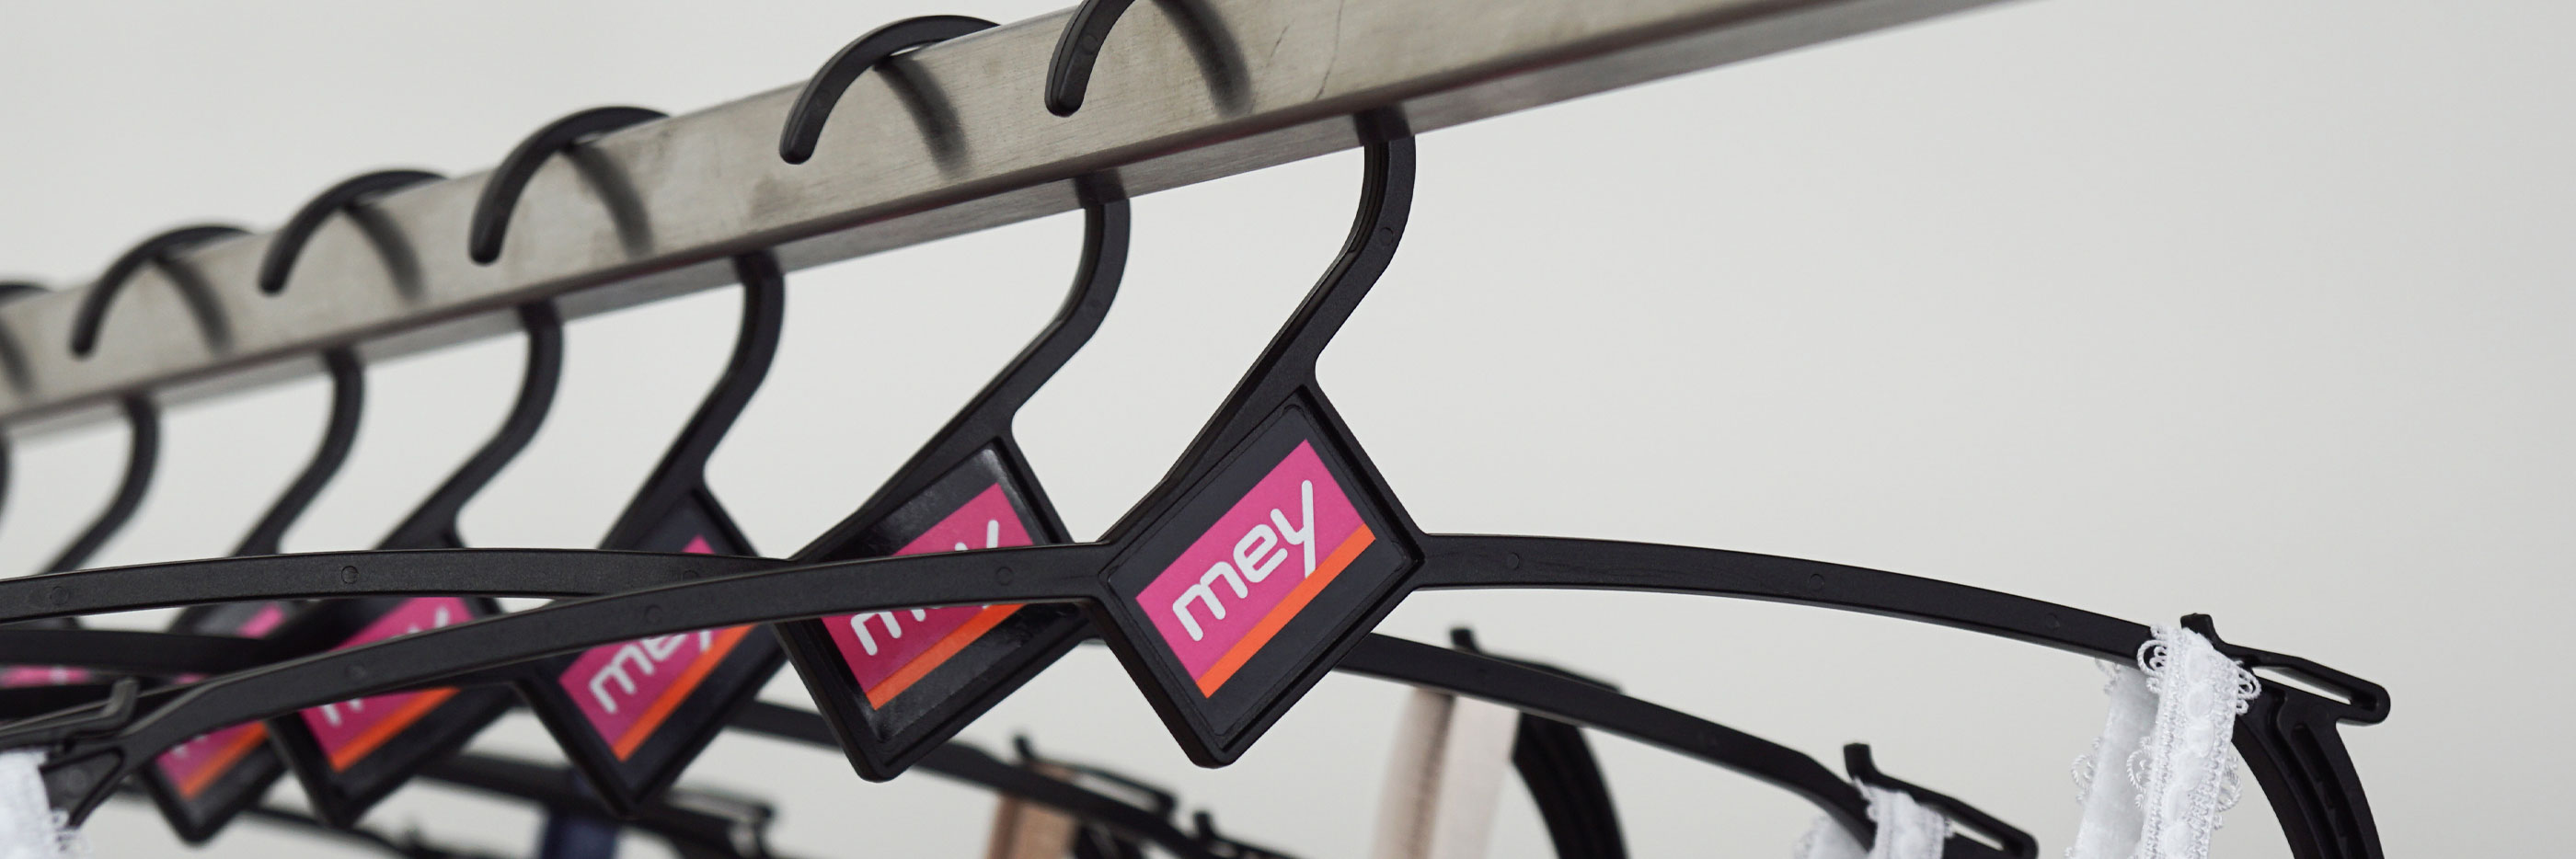 mey’s reusable hangers lined up on a clothing rail with clothing hanging from them | mey®